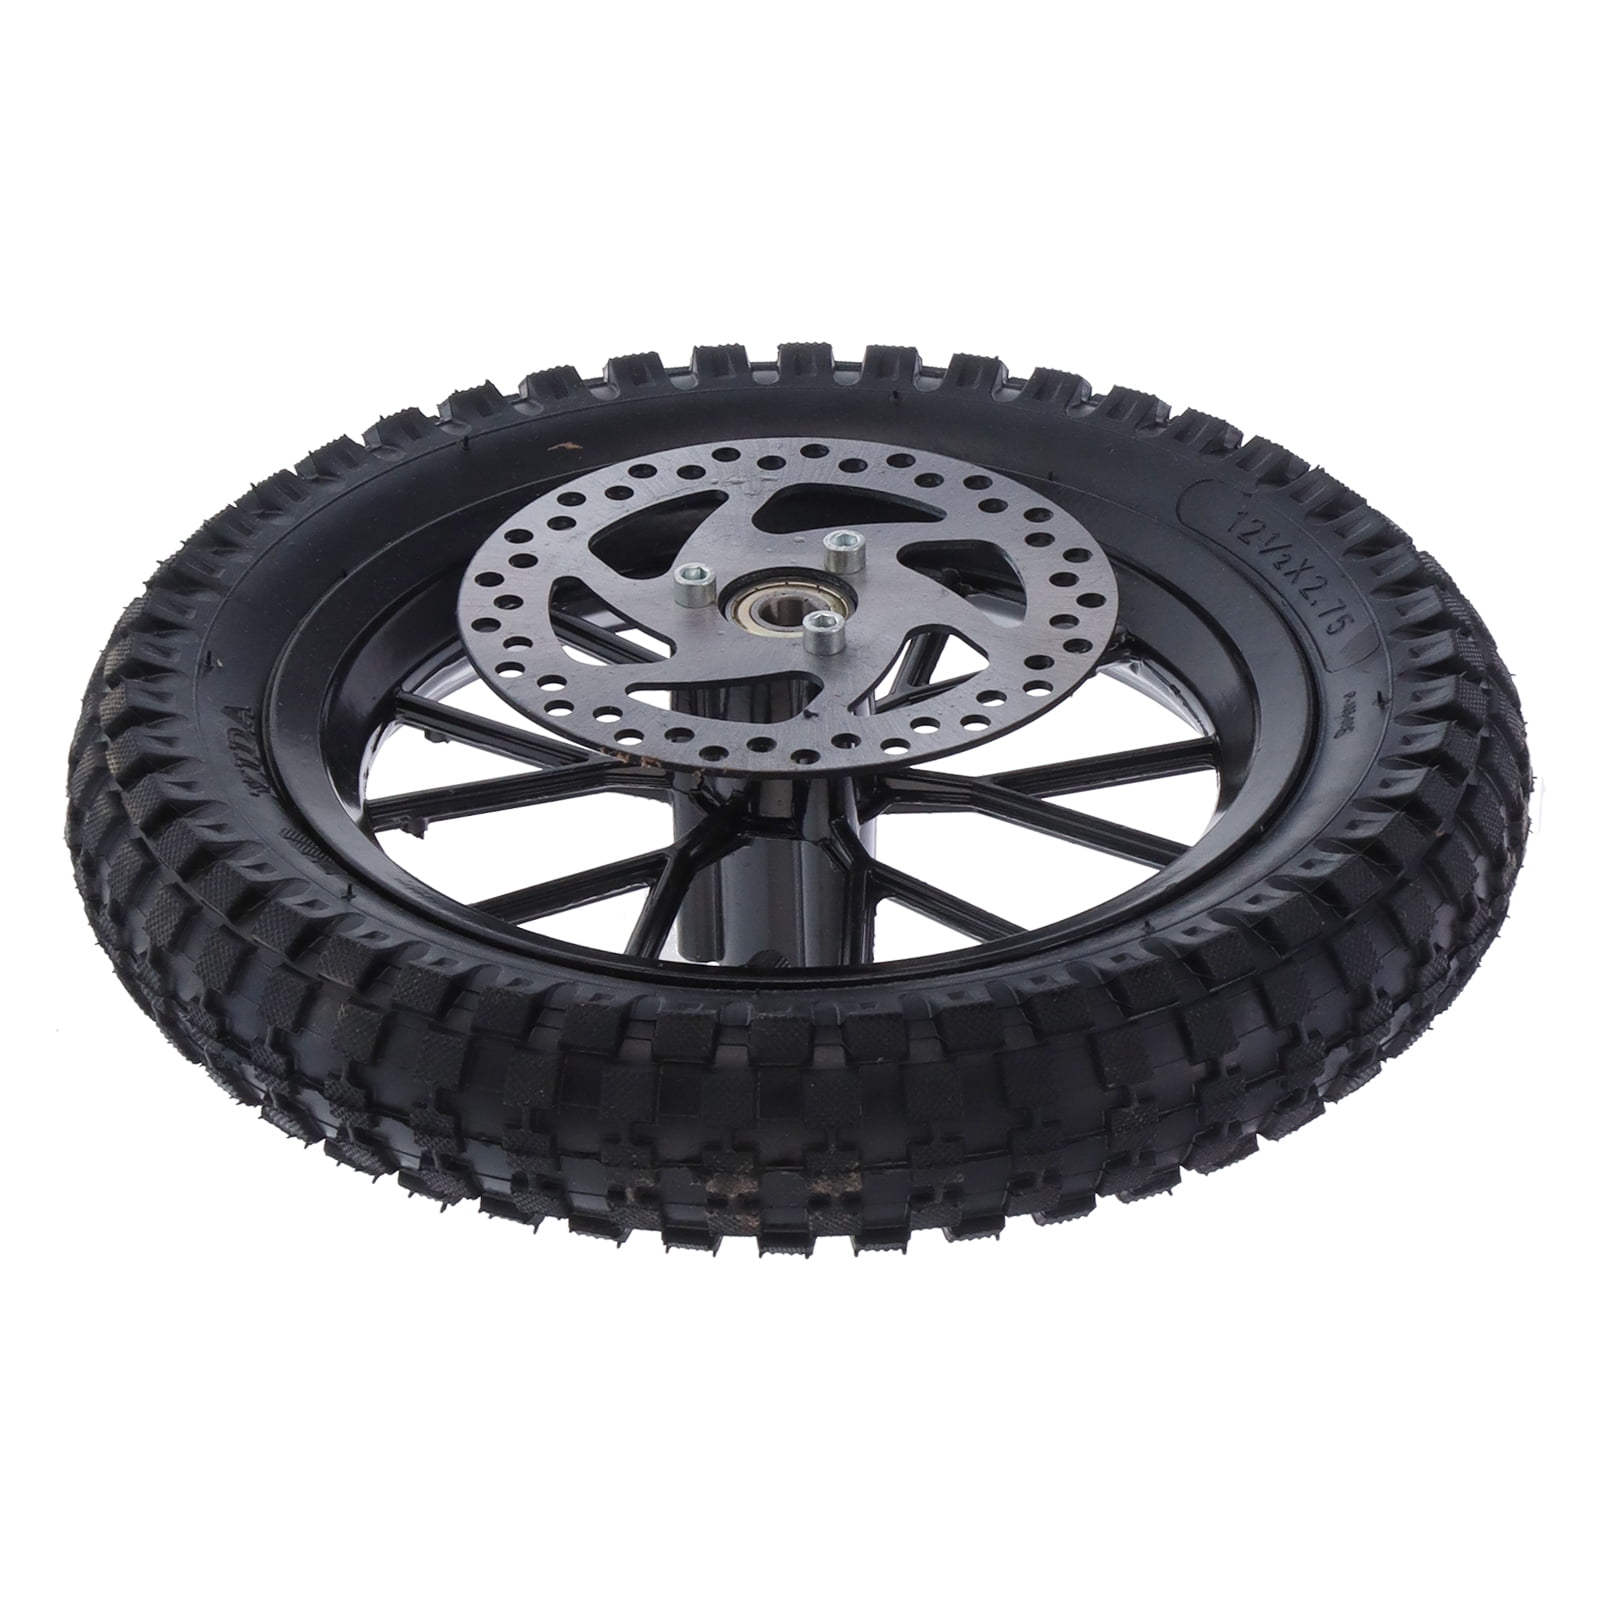 Anti‑Skid Front Motorcycle Tire Replacement Fits for 47cc 49cc 2 Stroke Mini Dirt Bike Thickened Rubber Front Dirt Bike Tire with Inner Tube & Metal Rim 12.5x2.75in Mini Dirt Bike Front Tire 